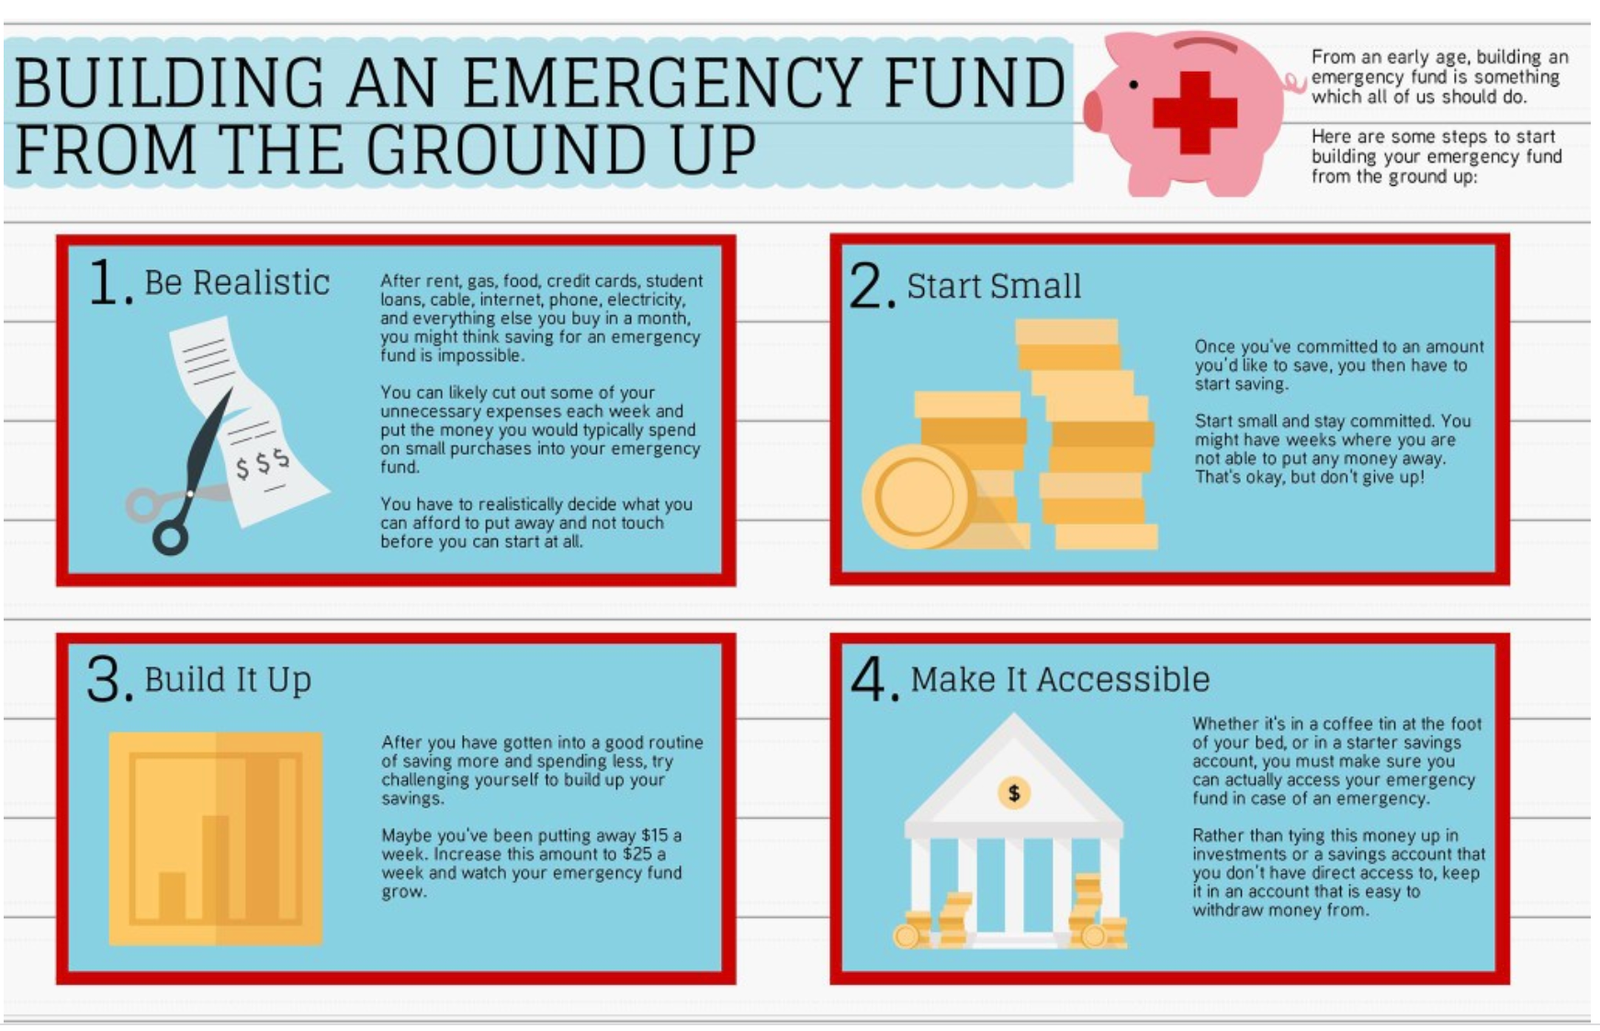 What Are Some Practical Strategies To Save Money And Build An Emergency Fund For Unexpected Expenses?